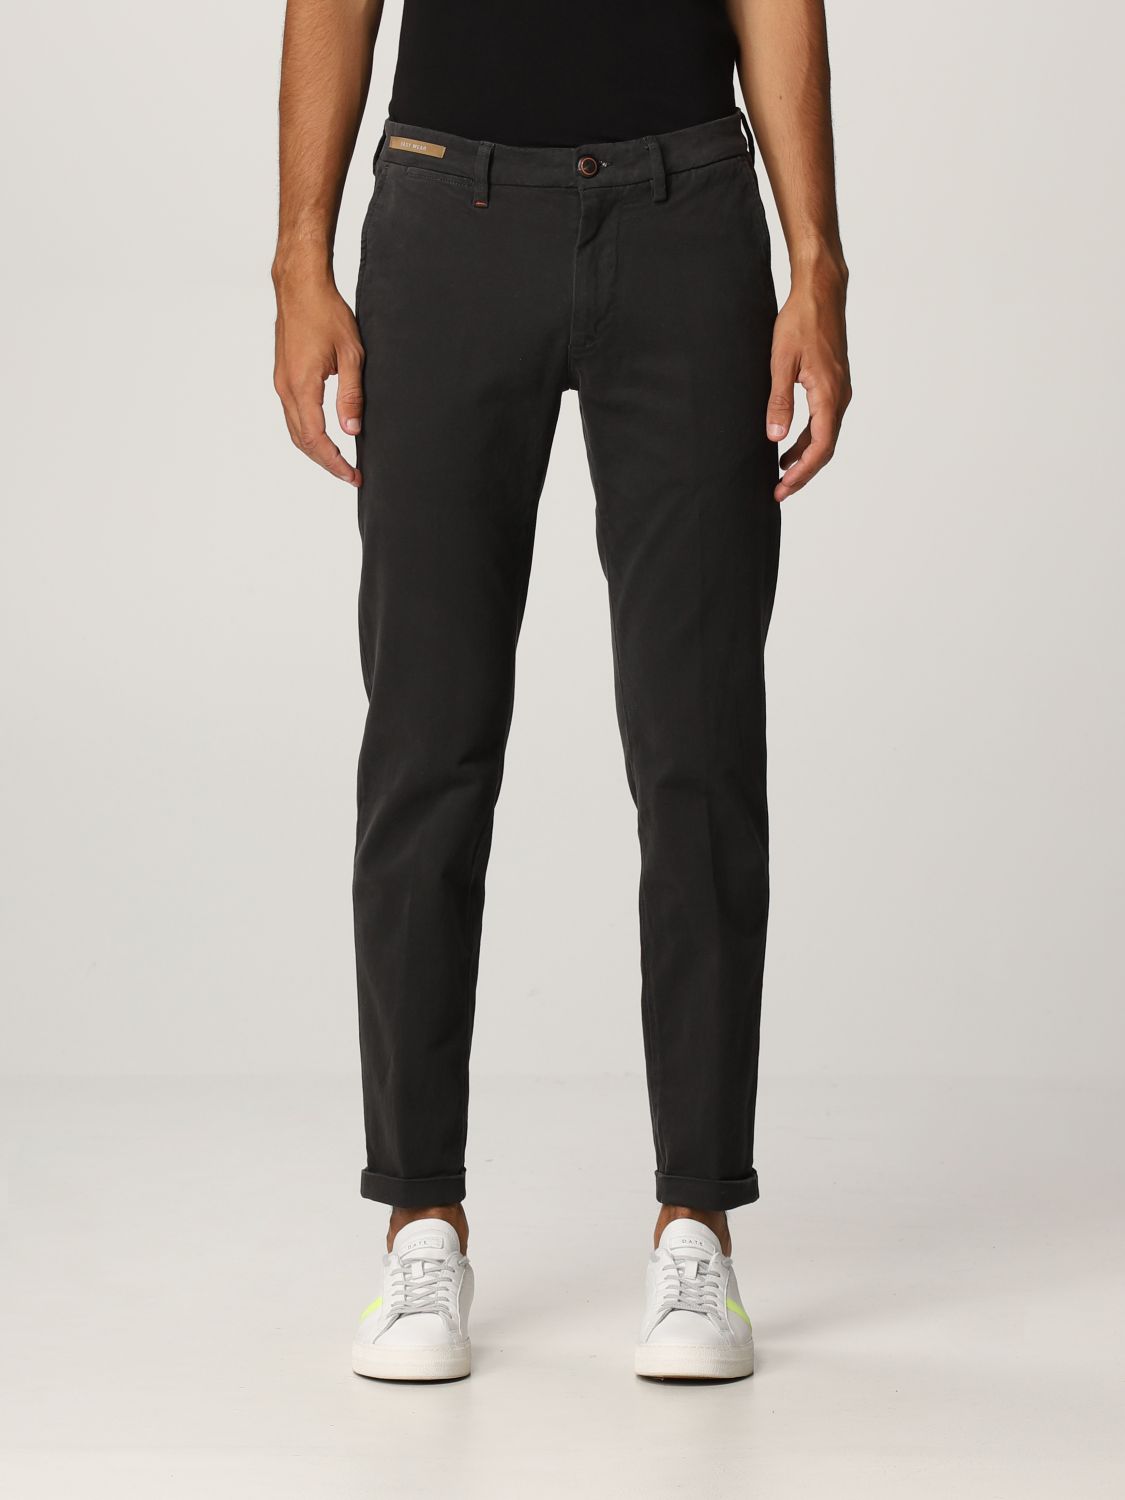 RE-HASH: Mucha pants in stretch cotton - Charcoal | Pants Re-Hash P249 ...